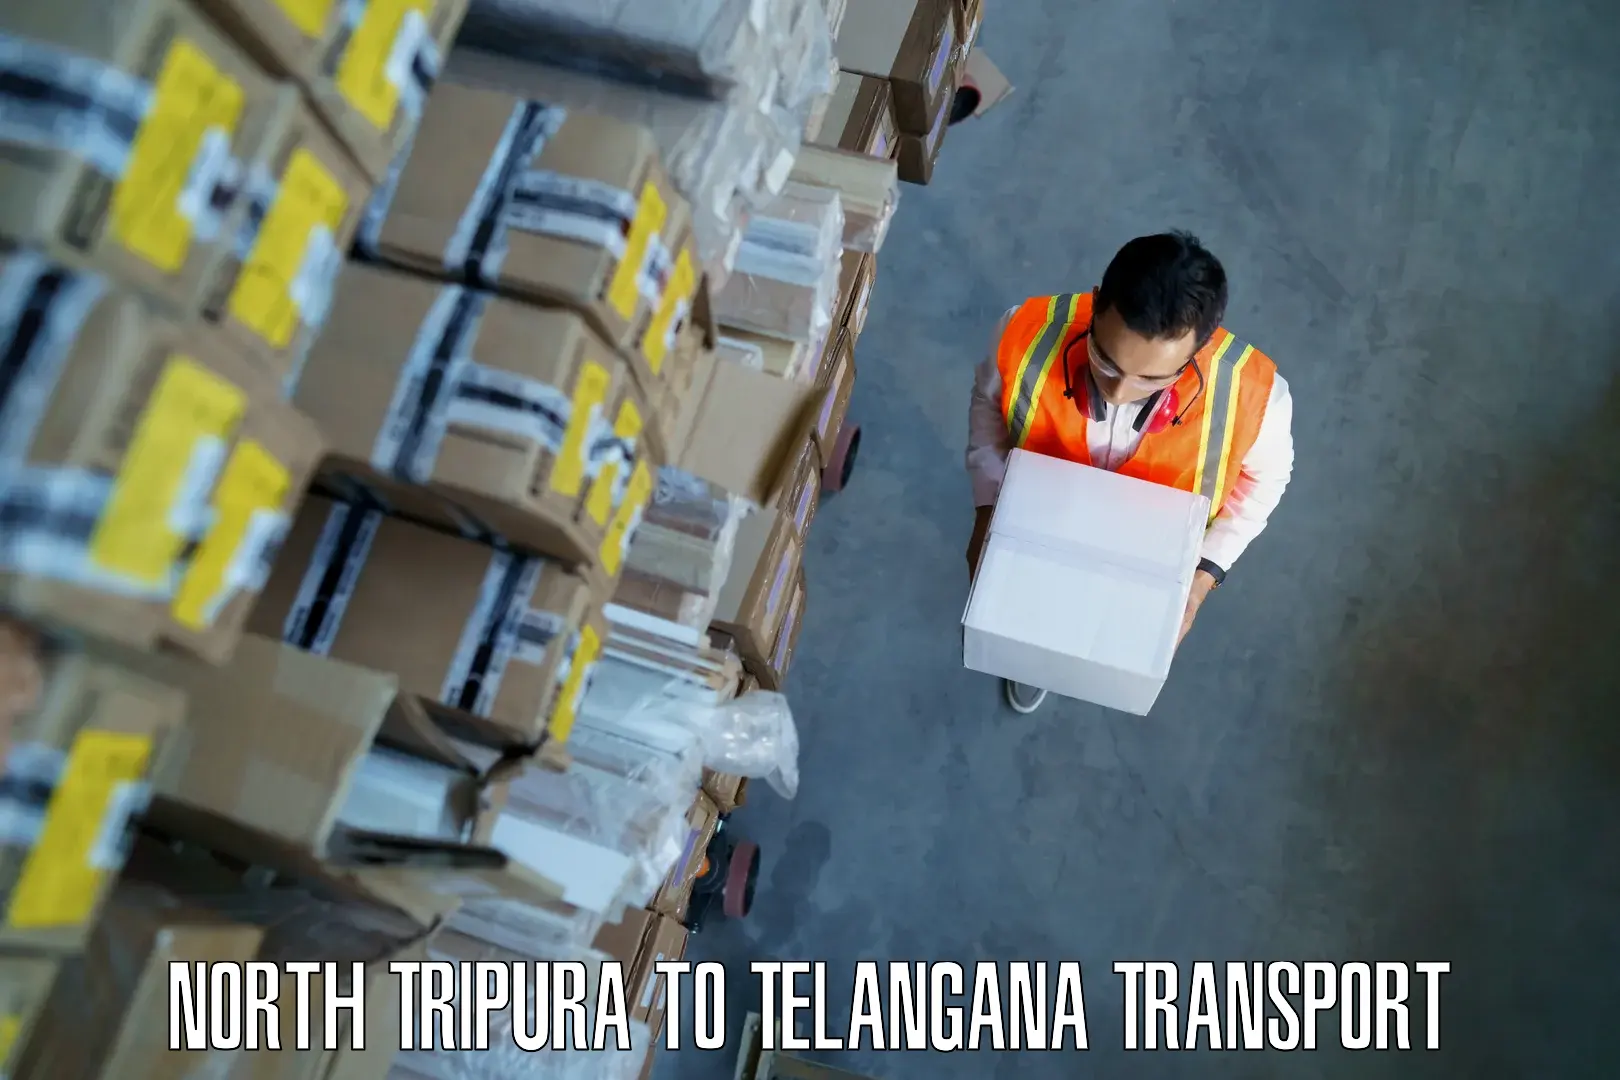 Lorry transport service North Tripura to Ghanpur